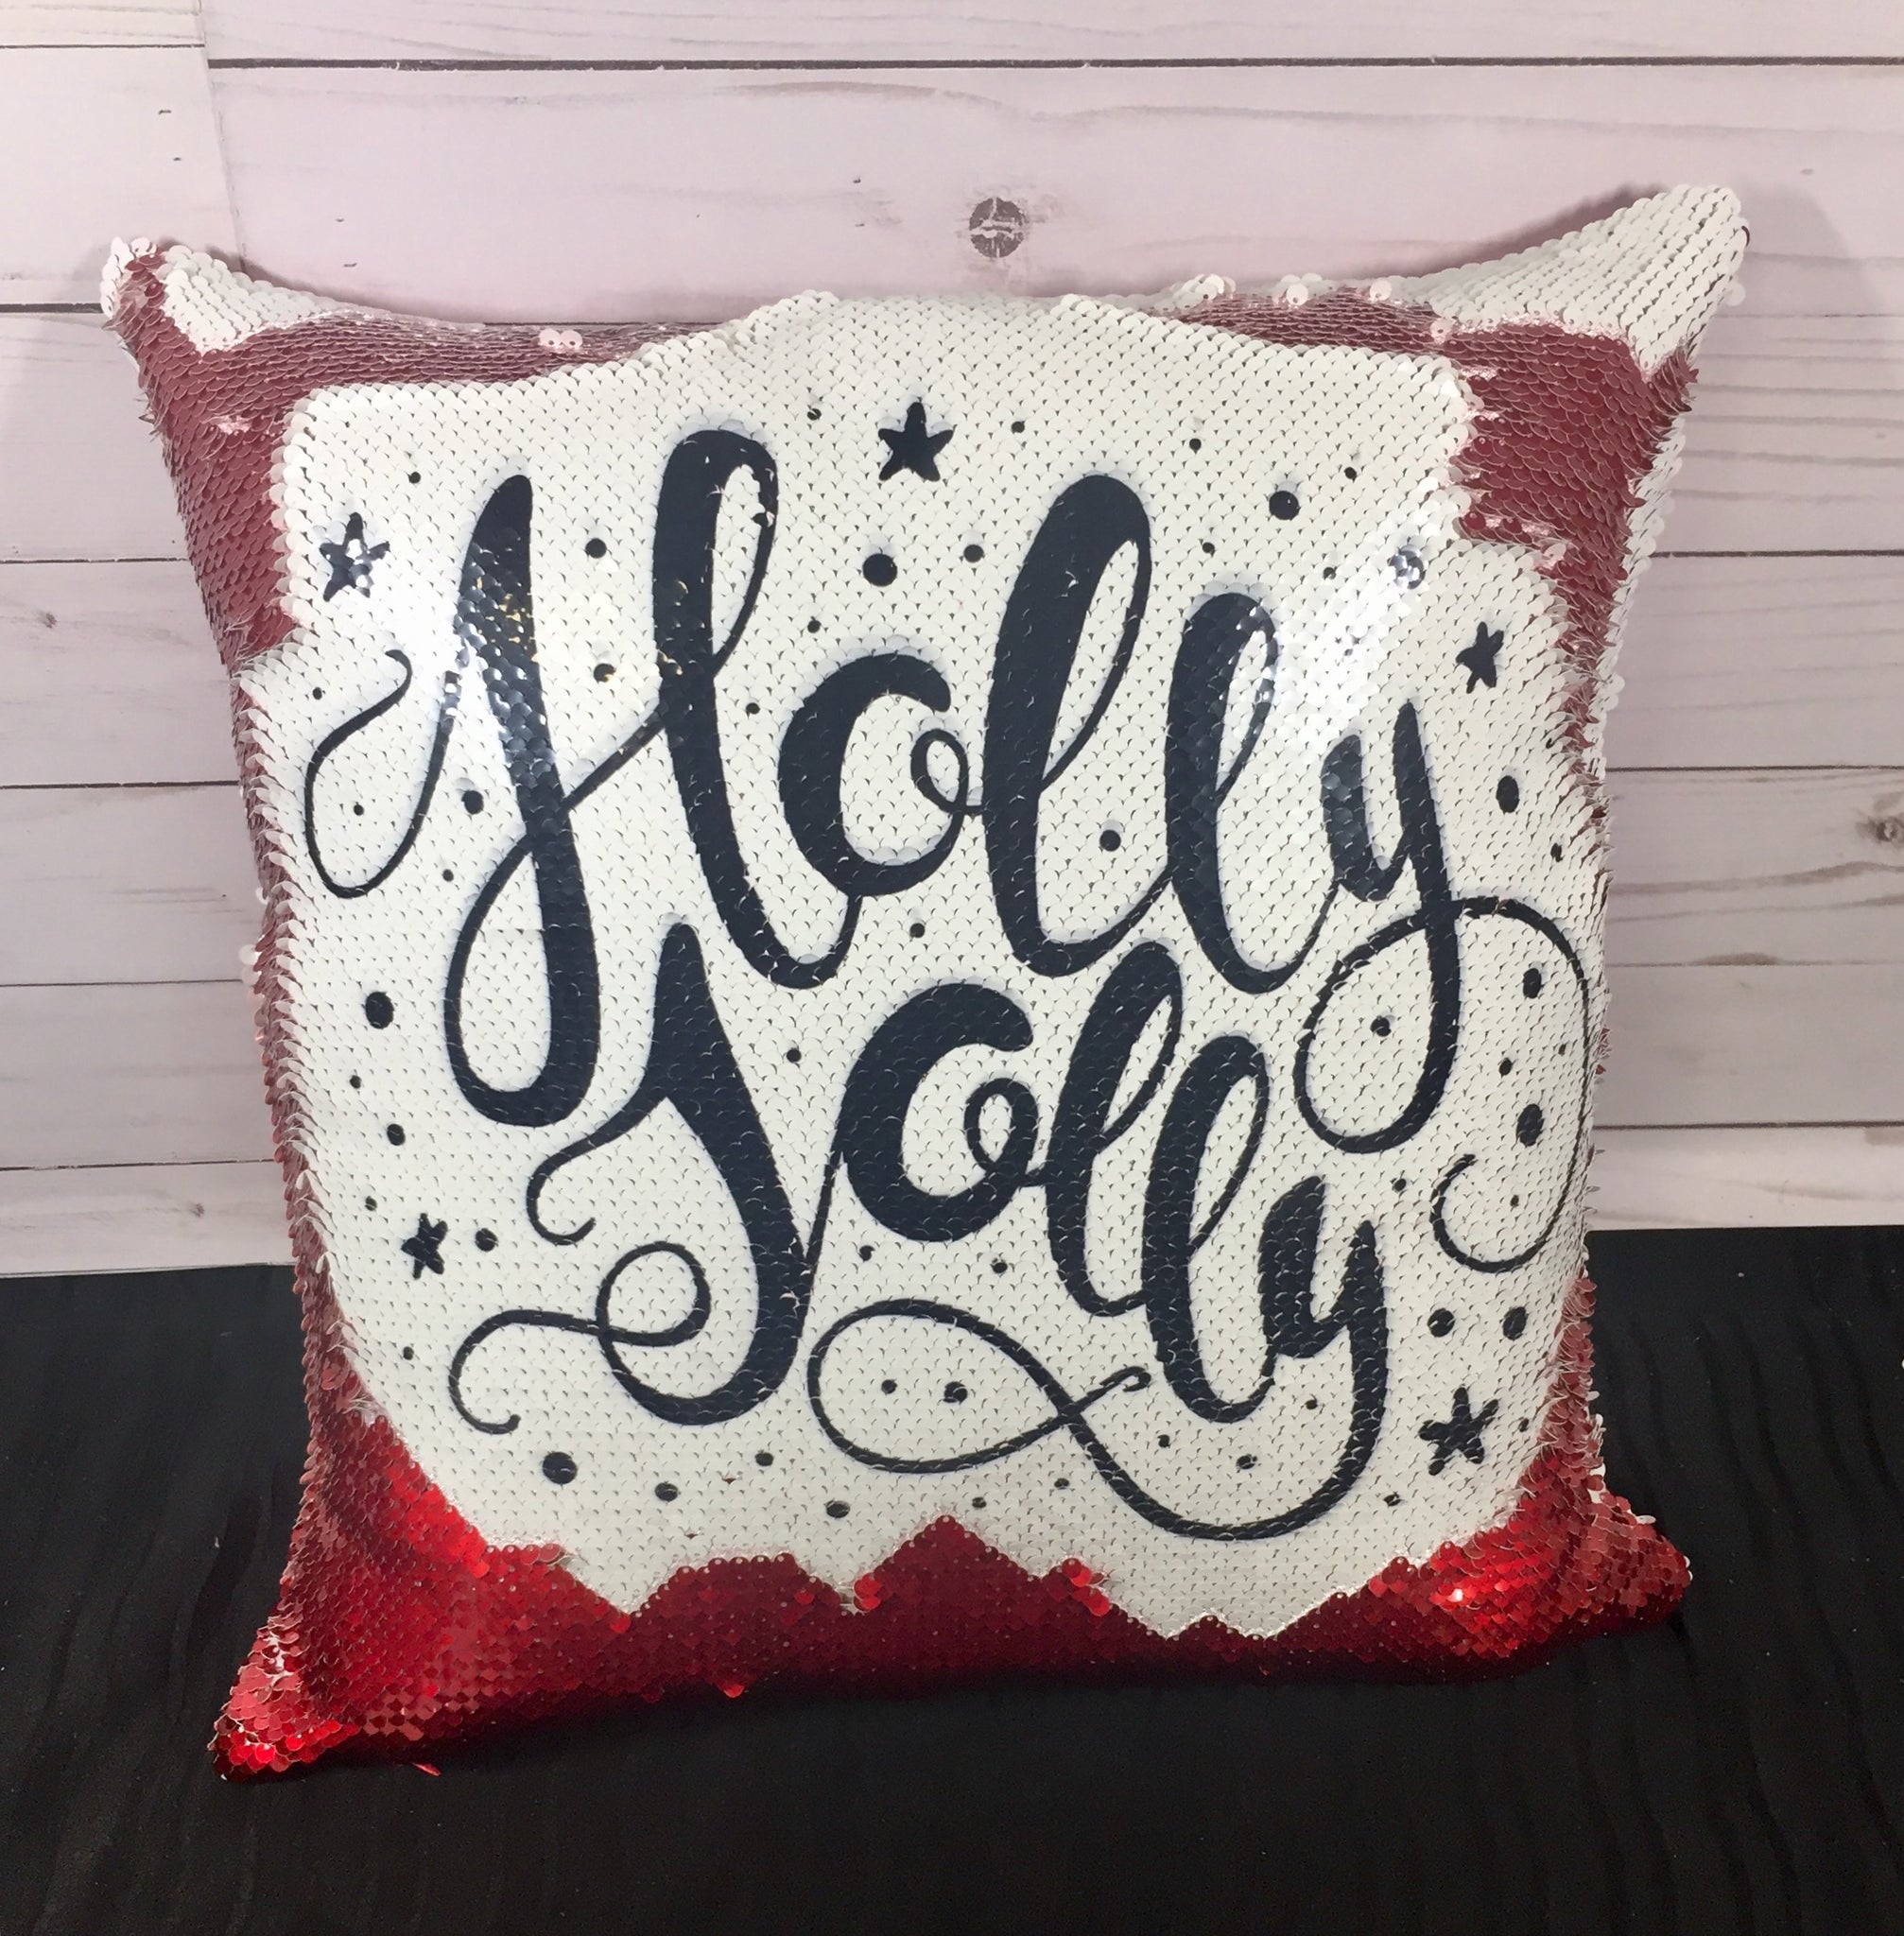 Holly Jolly Characters Personalized Christmas Throw Pillows